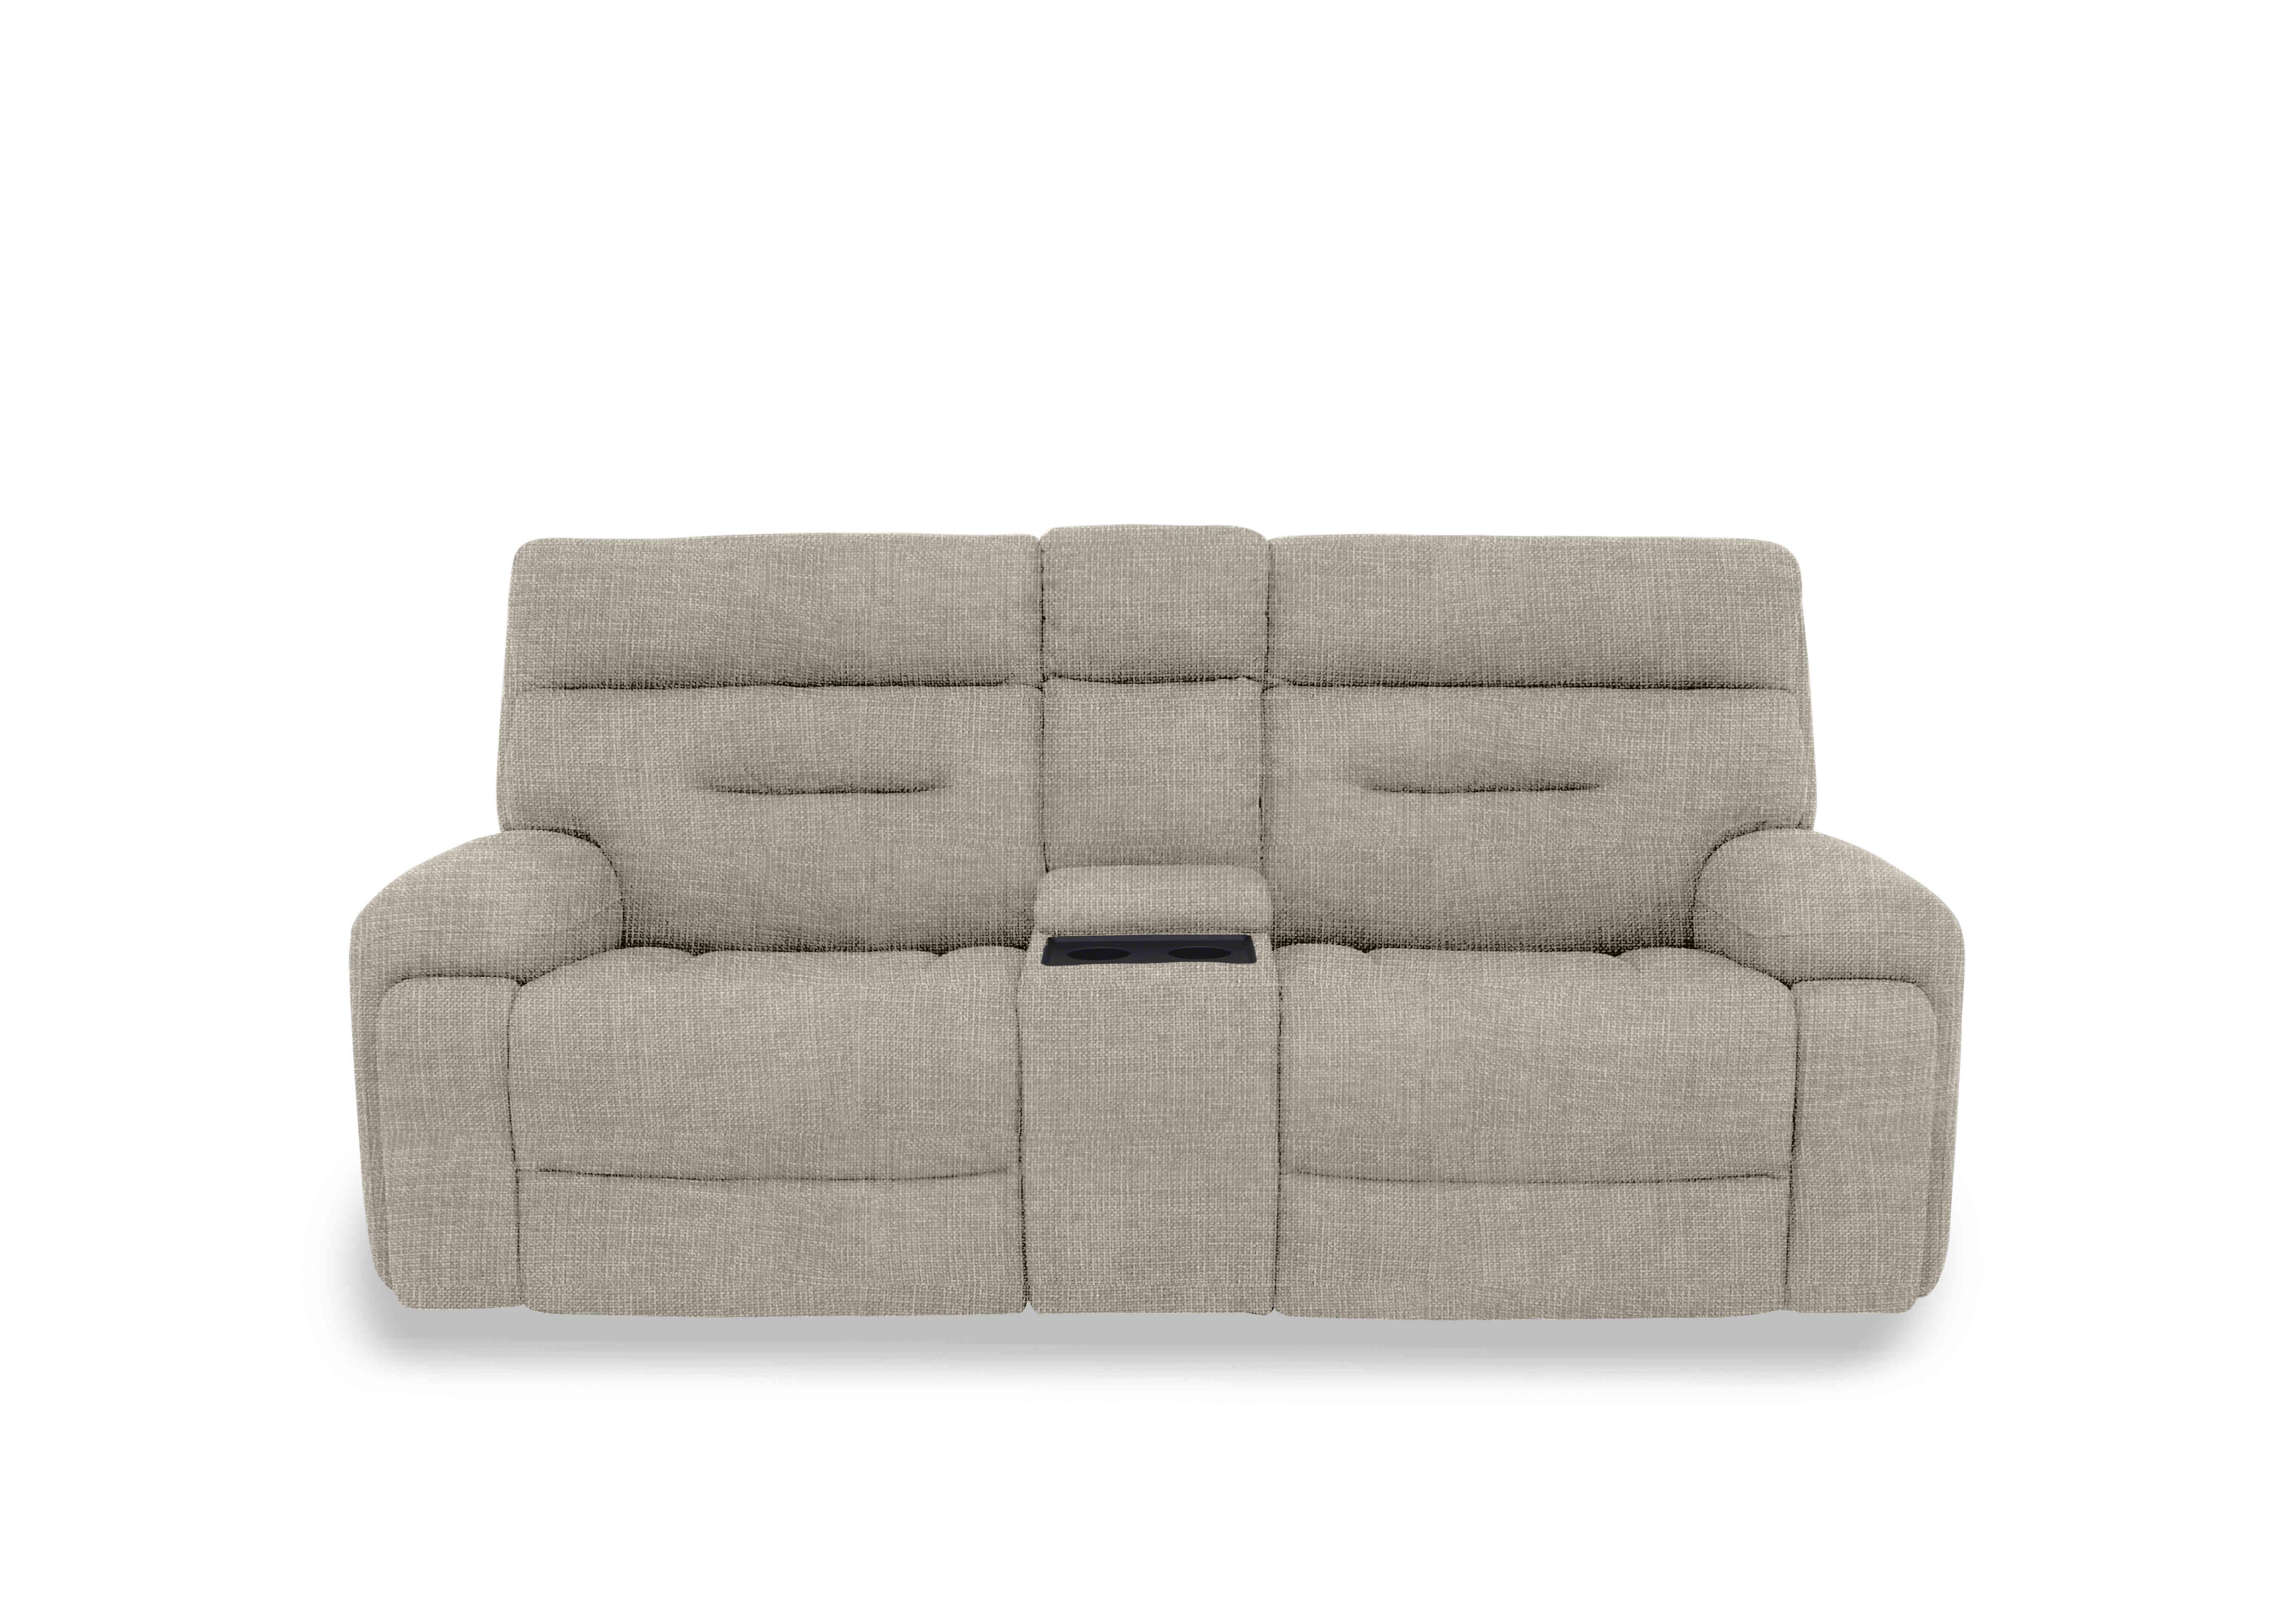 Cinemax Media 3 Seater Fabric Power Recliner Sofa with Power Headrests in Hf-0103 Halifax Sand on Furniture Village